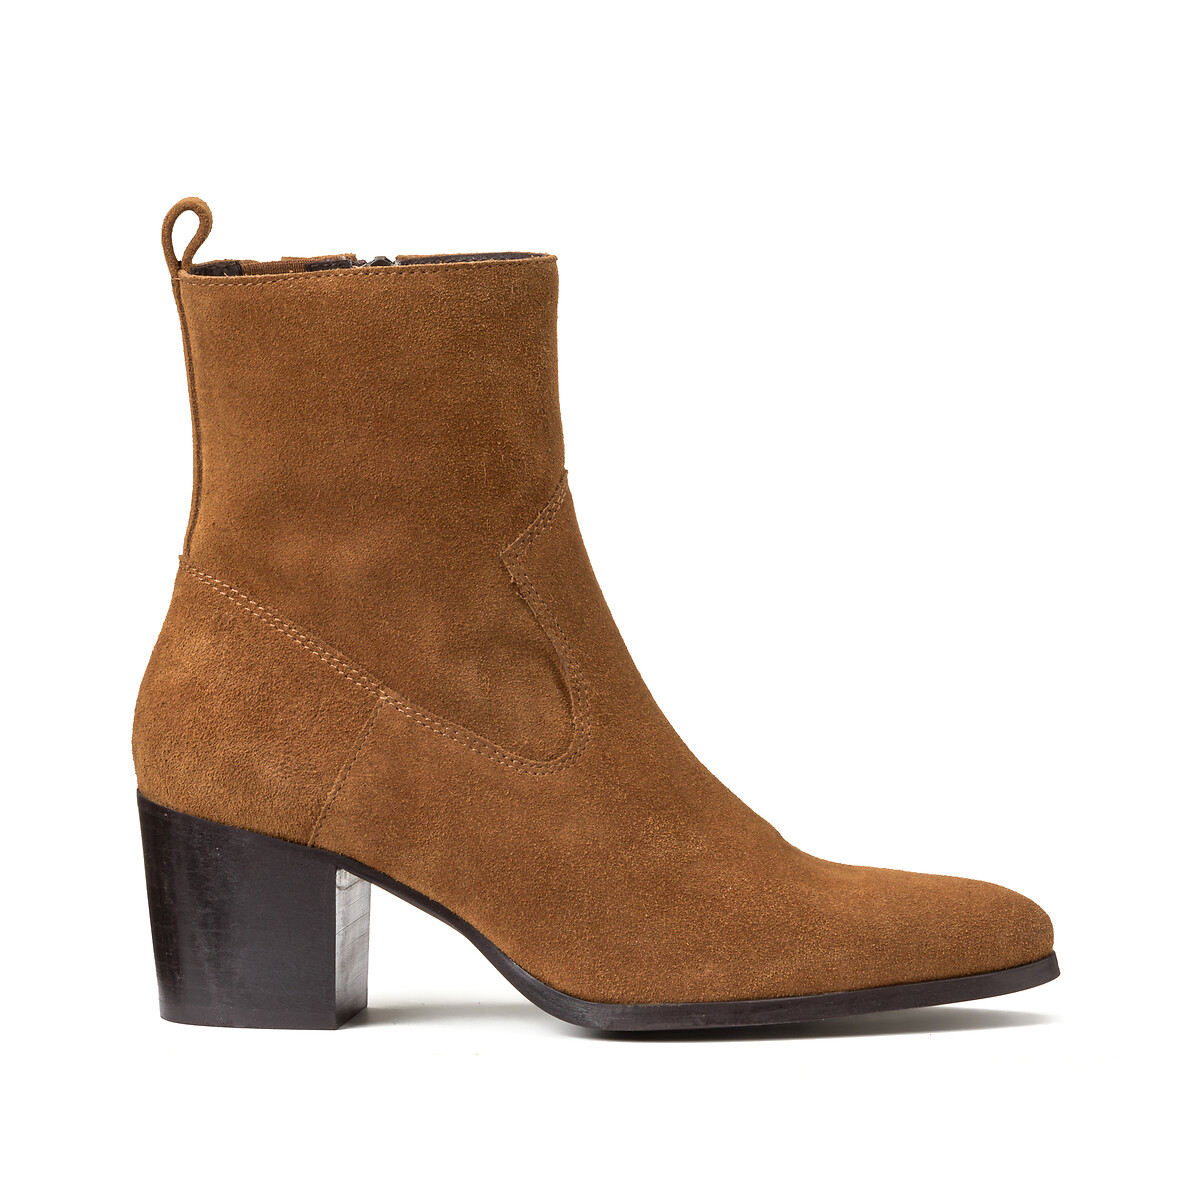 Suede Western Ankle Boots, Made in Europe